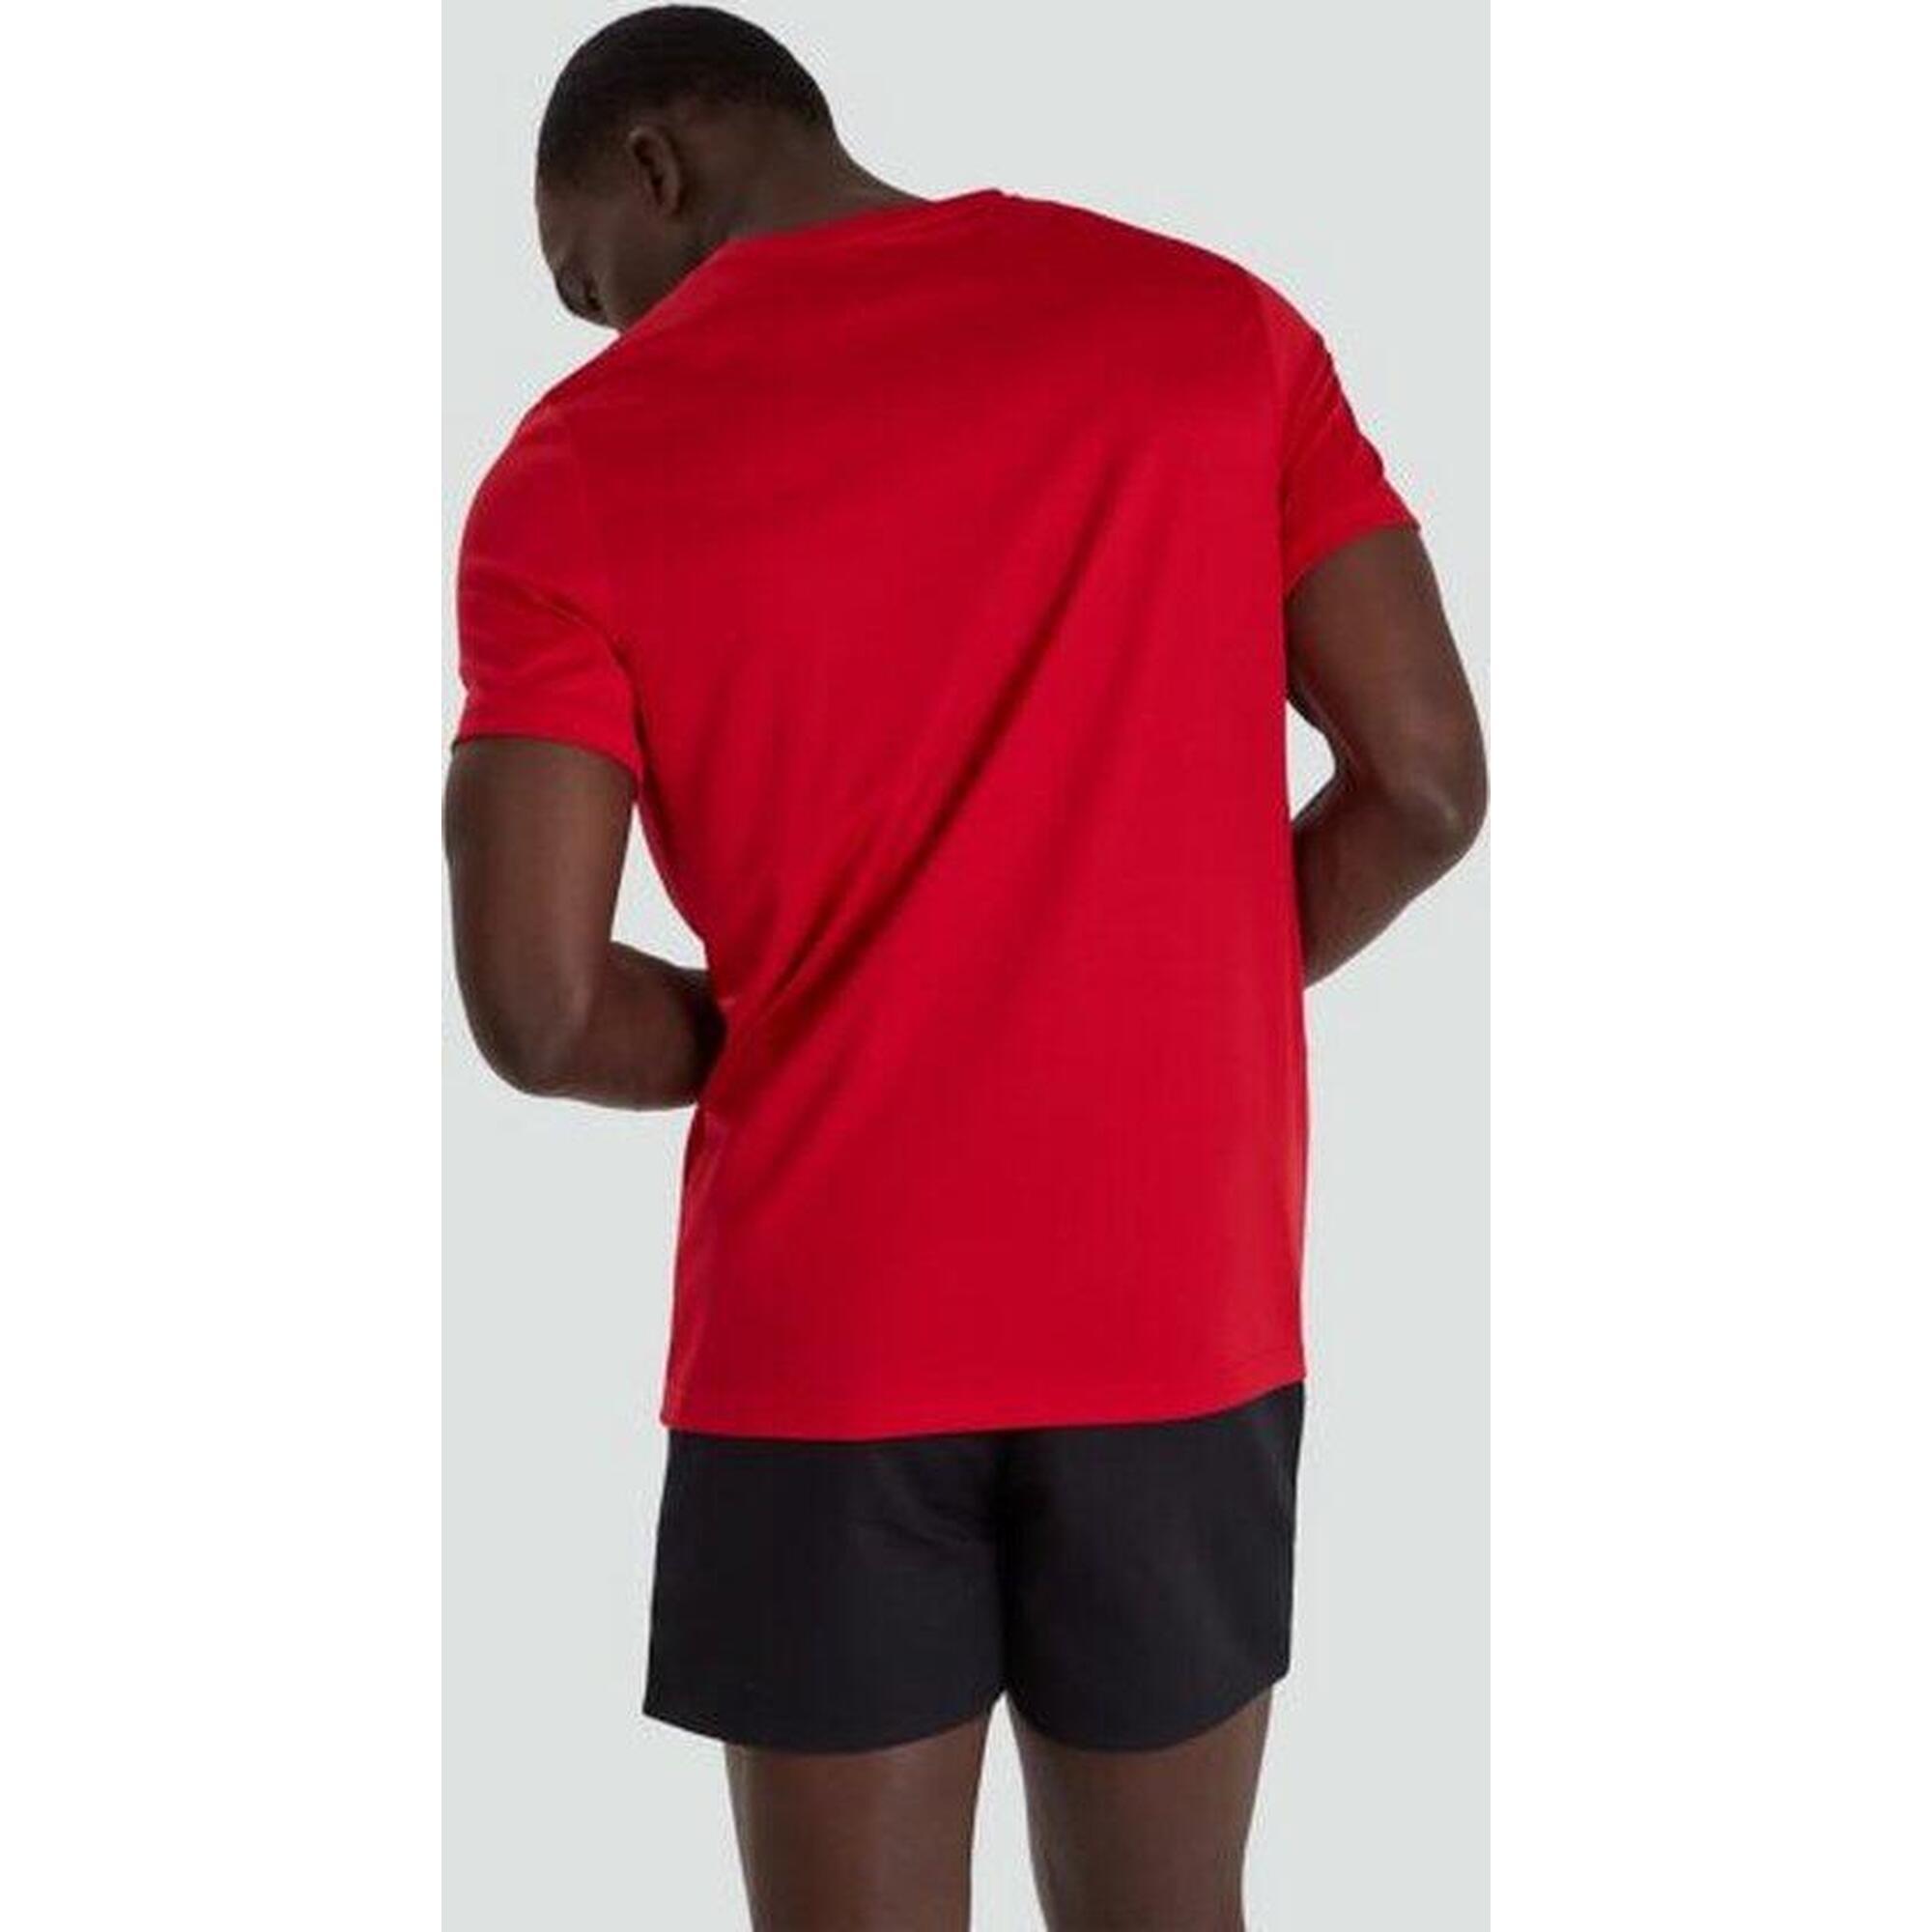 T-shirt sport rugby - hommes Adultes Rouge